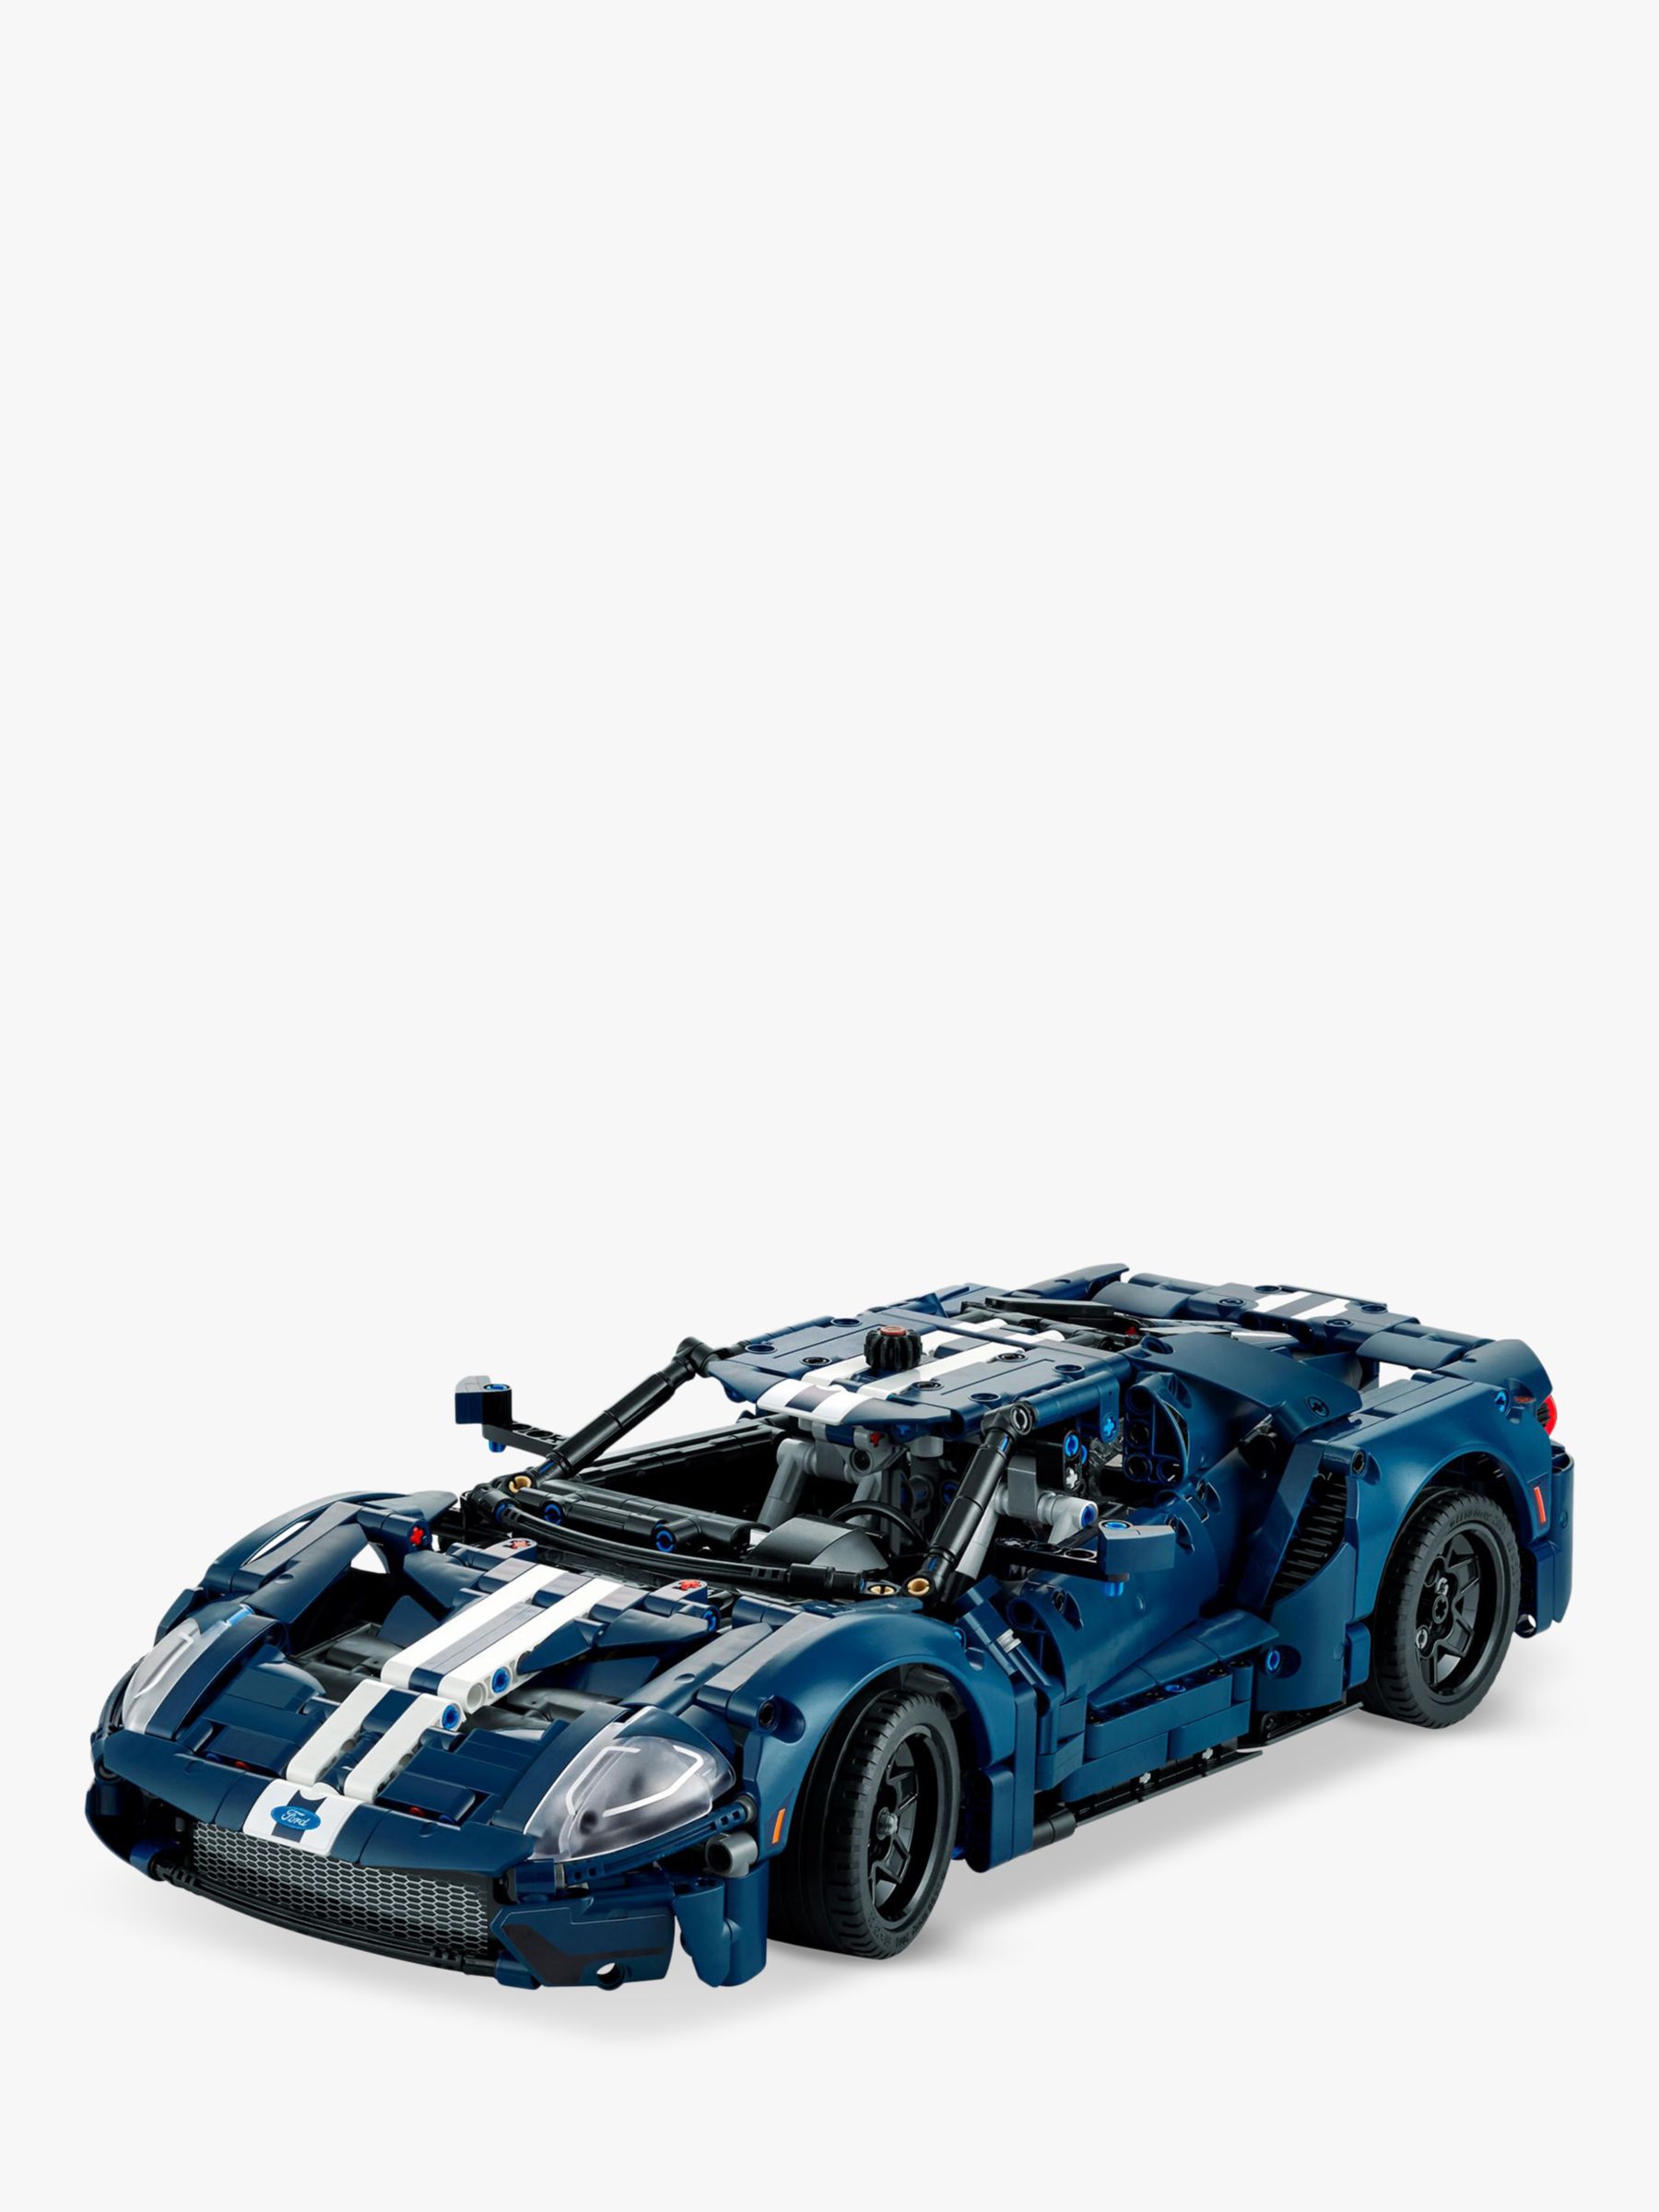  LEGO Technic 2022 Ford GT 42154 Car Model Kit for Adults to  Build, Collectible Set, 1:12 Scale Supercar with Authentic Features, Gift  Idea That Fuels Creativity and Imagination : Toys & Games